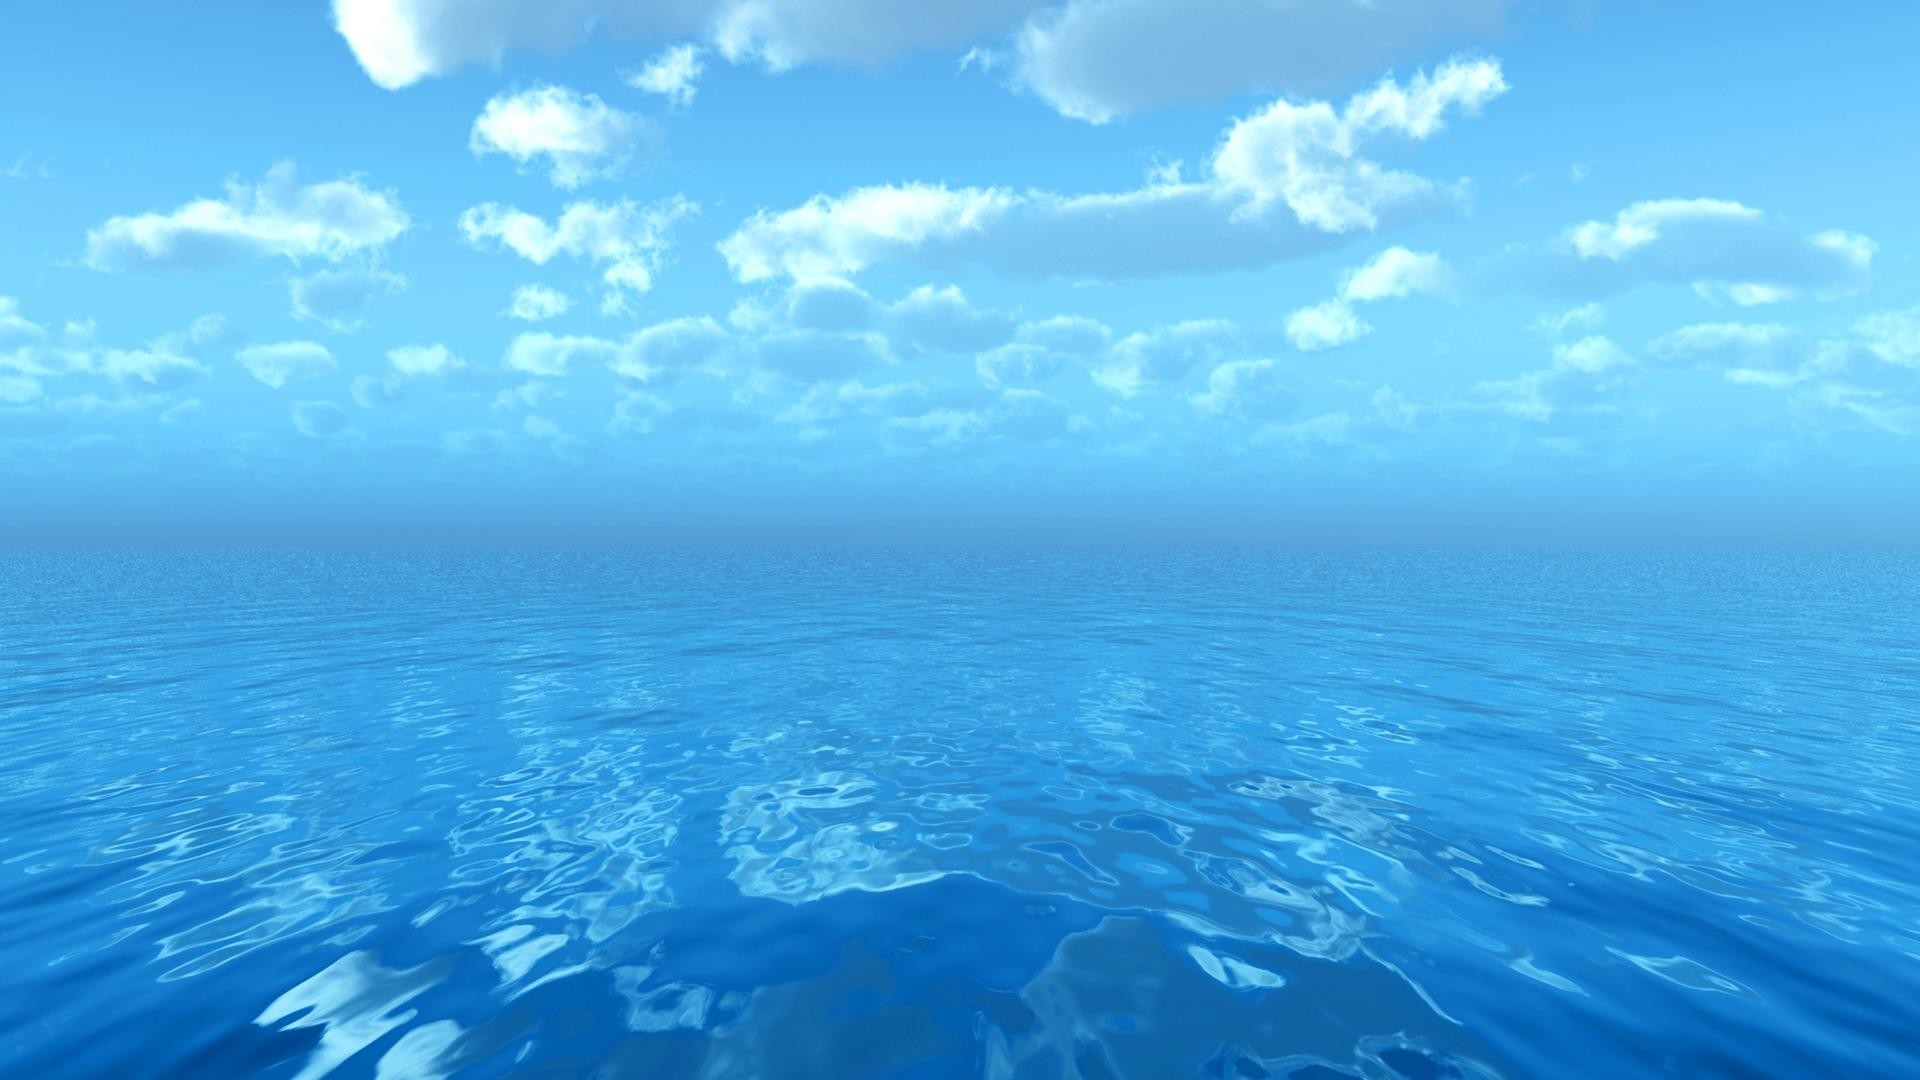 1920x1080 High Resolution Ocean Wallpaper 1920X1080 For more pictures visit  http://a-sea